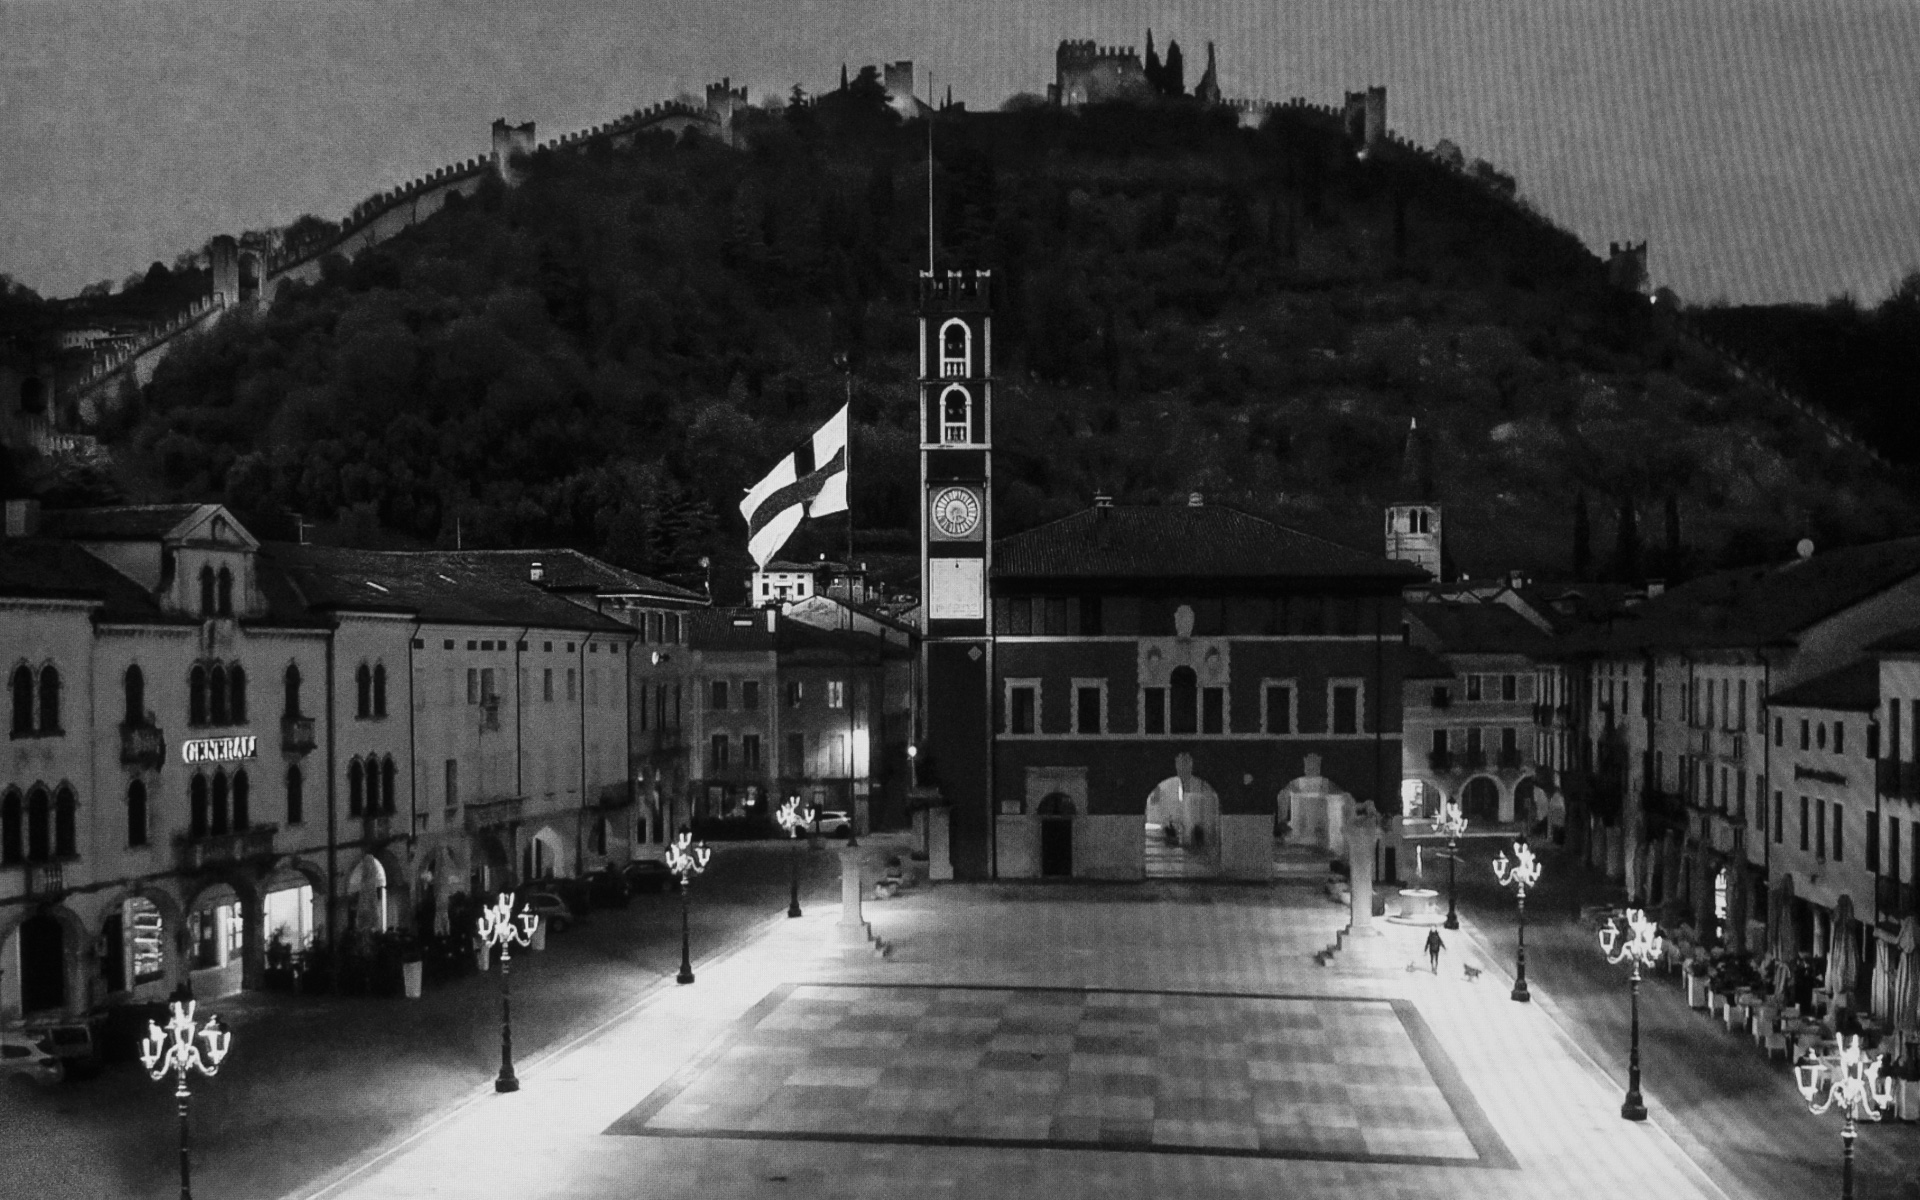 Marostica, Chess Square - The local citizen with two dogs takes an evening stroll through the Scacchi square named by a giant chess set. In the background Castle of Marostica. Province Vicenza, March 26. 2020.